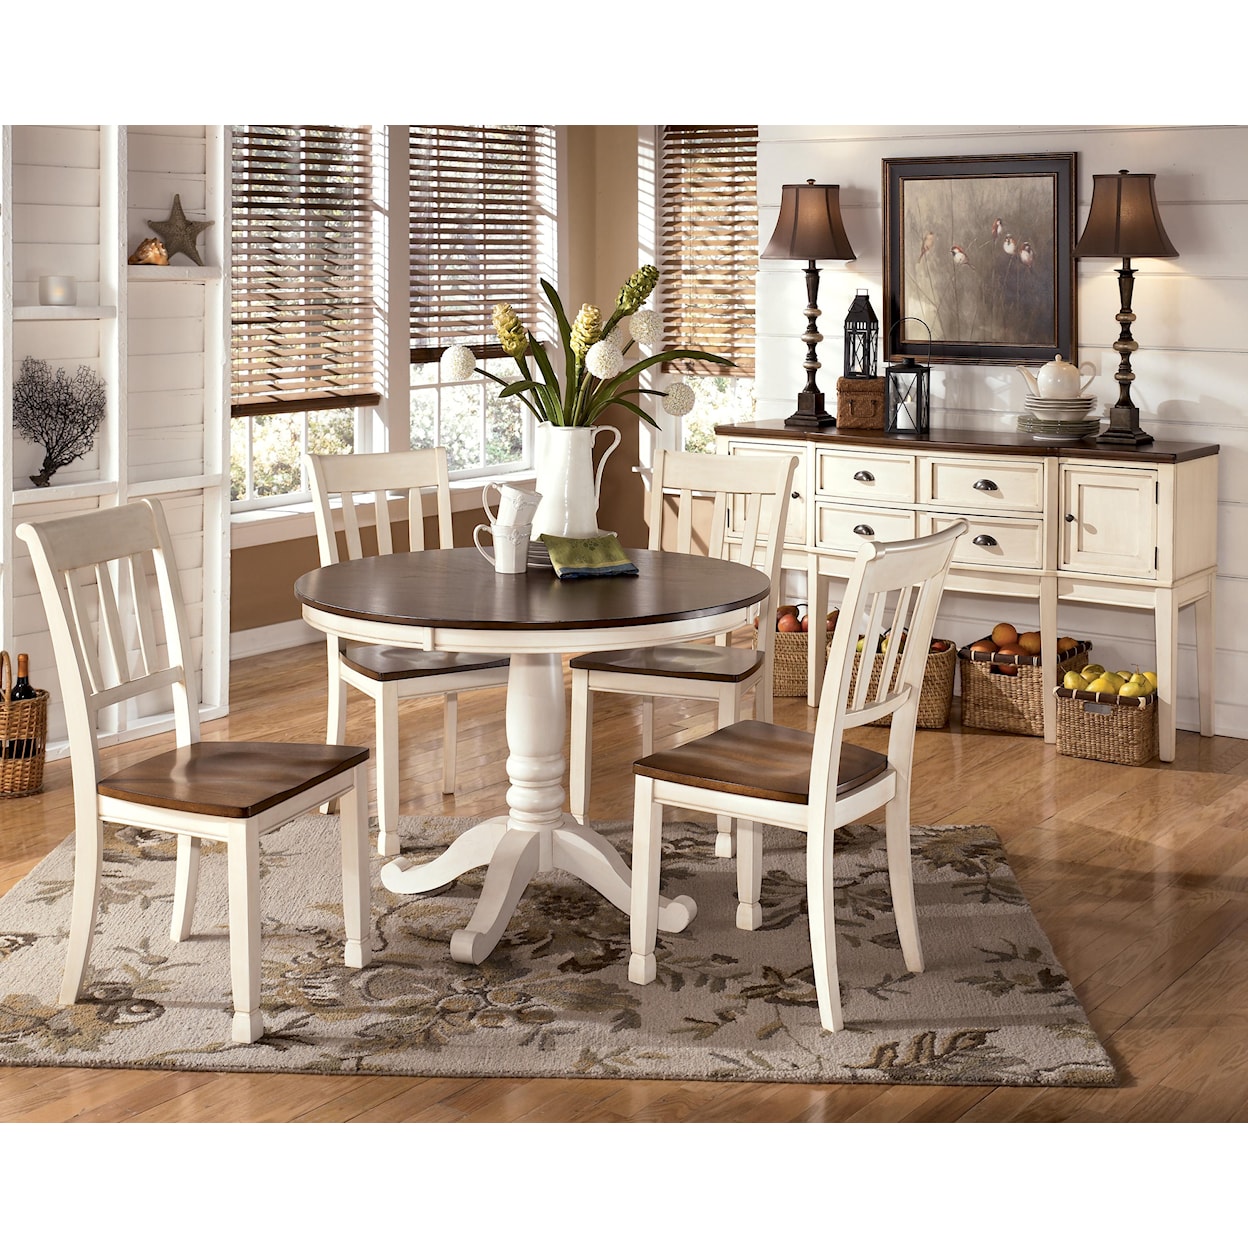 Ashley Furniture Signature Design Whitesburg Dining Room Side Chair